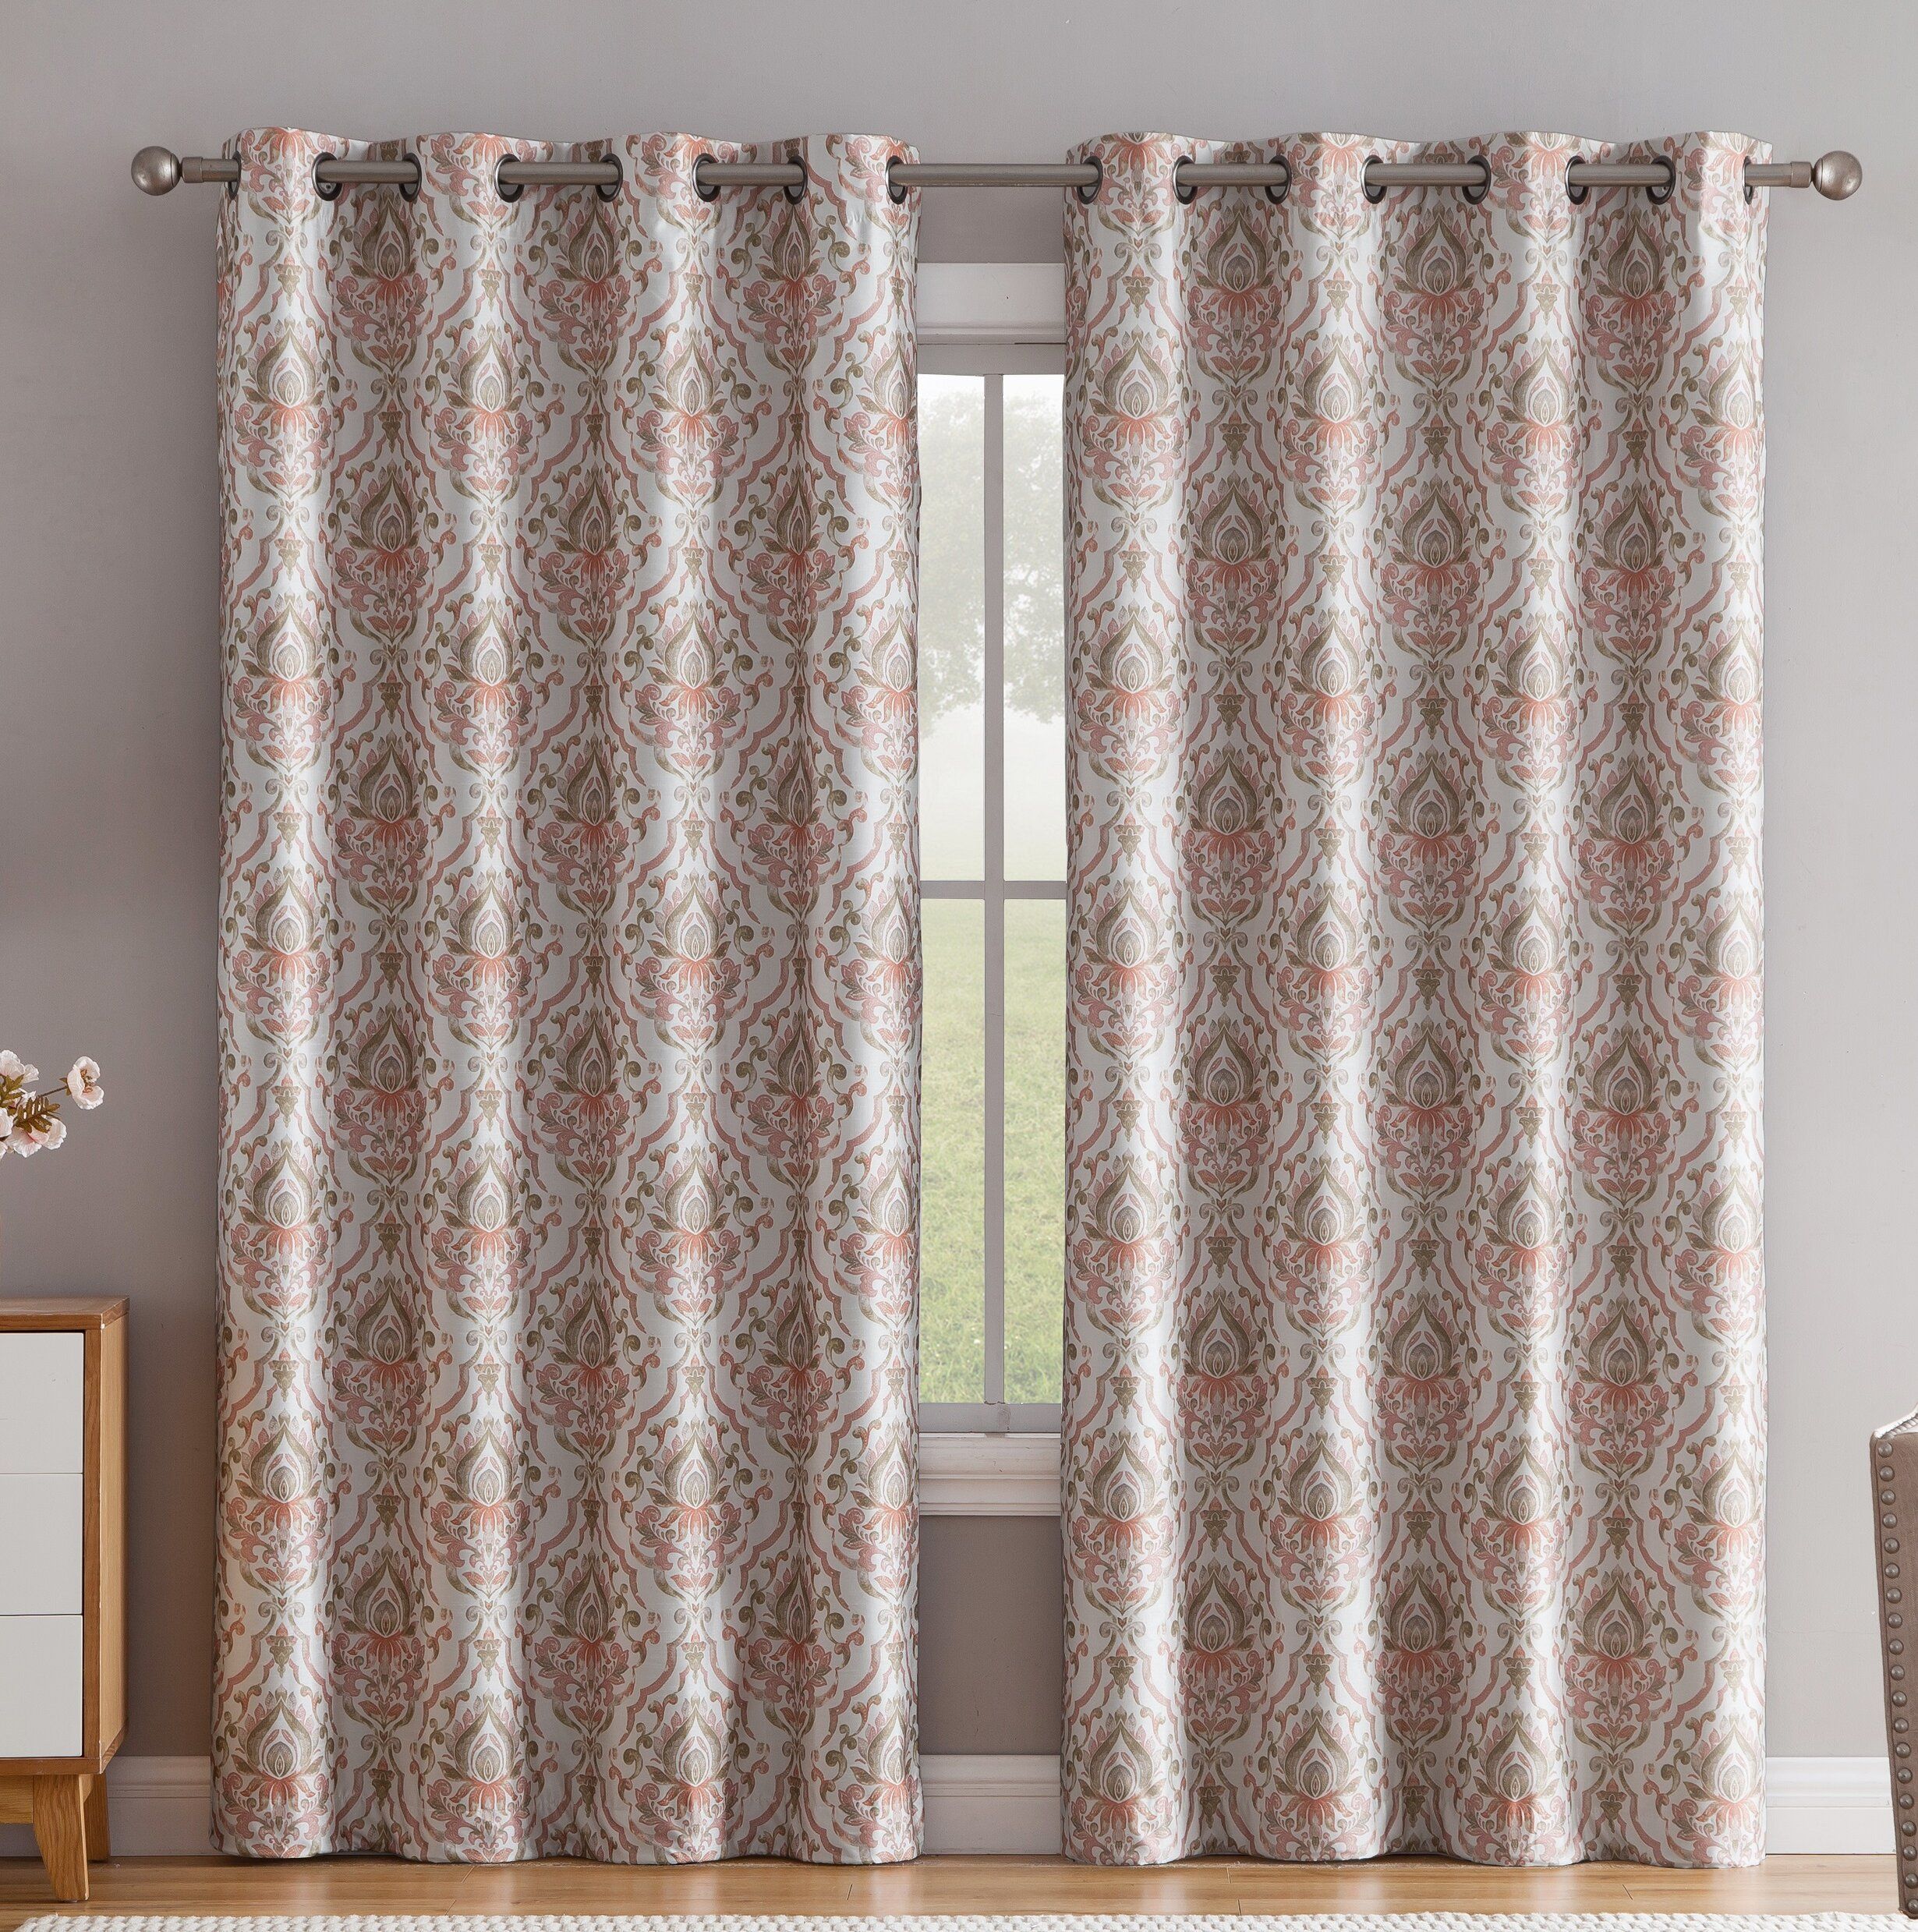 Brayden Studio Kempner Damask Max Blackout Thermal Grommet Intended For Duran Thermal Insulated Blackout Grommet Curtain Panels (Photo 12 of 20)